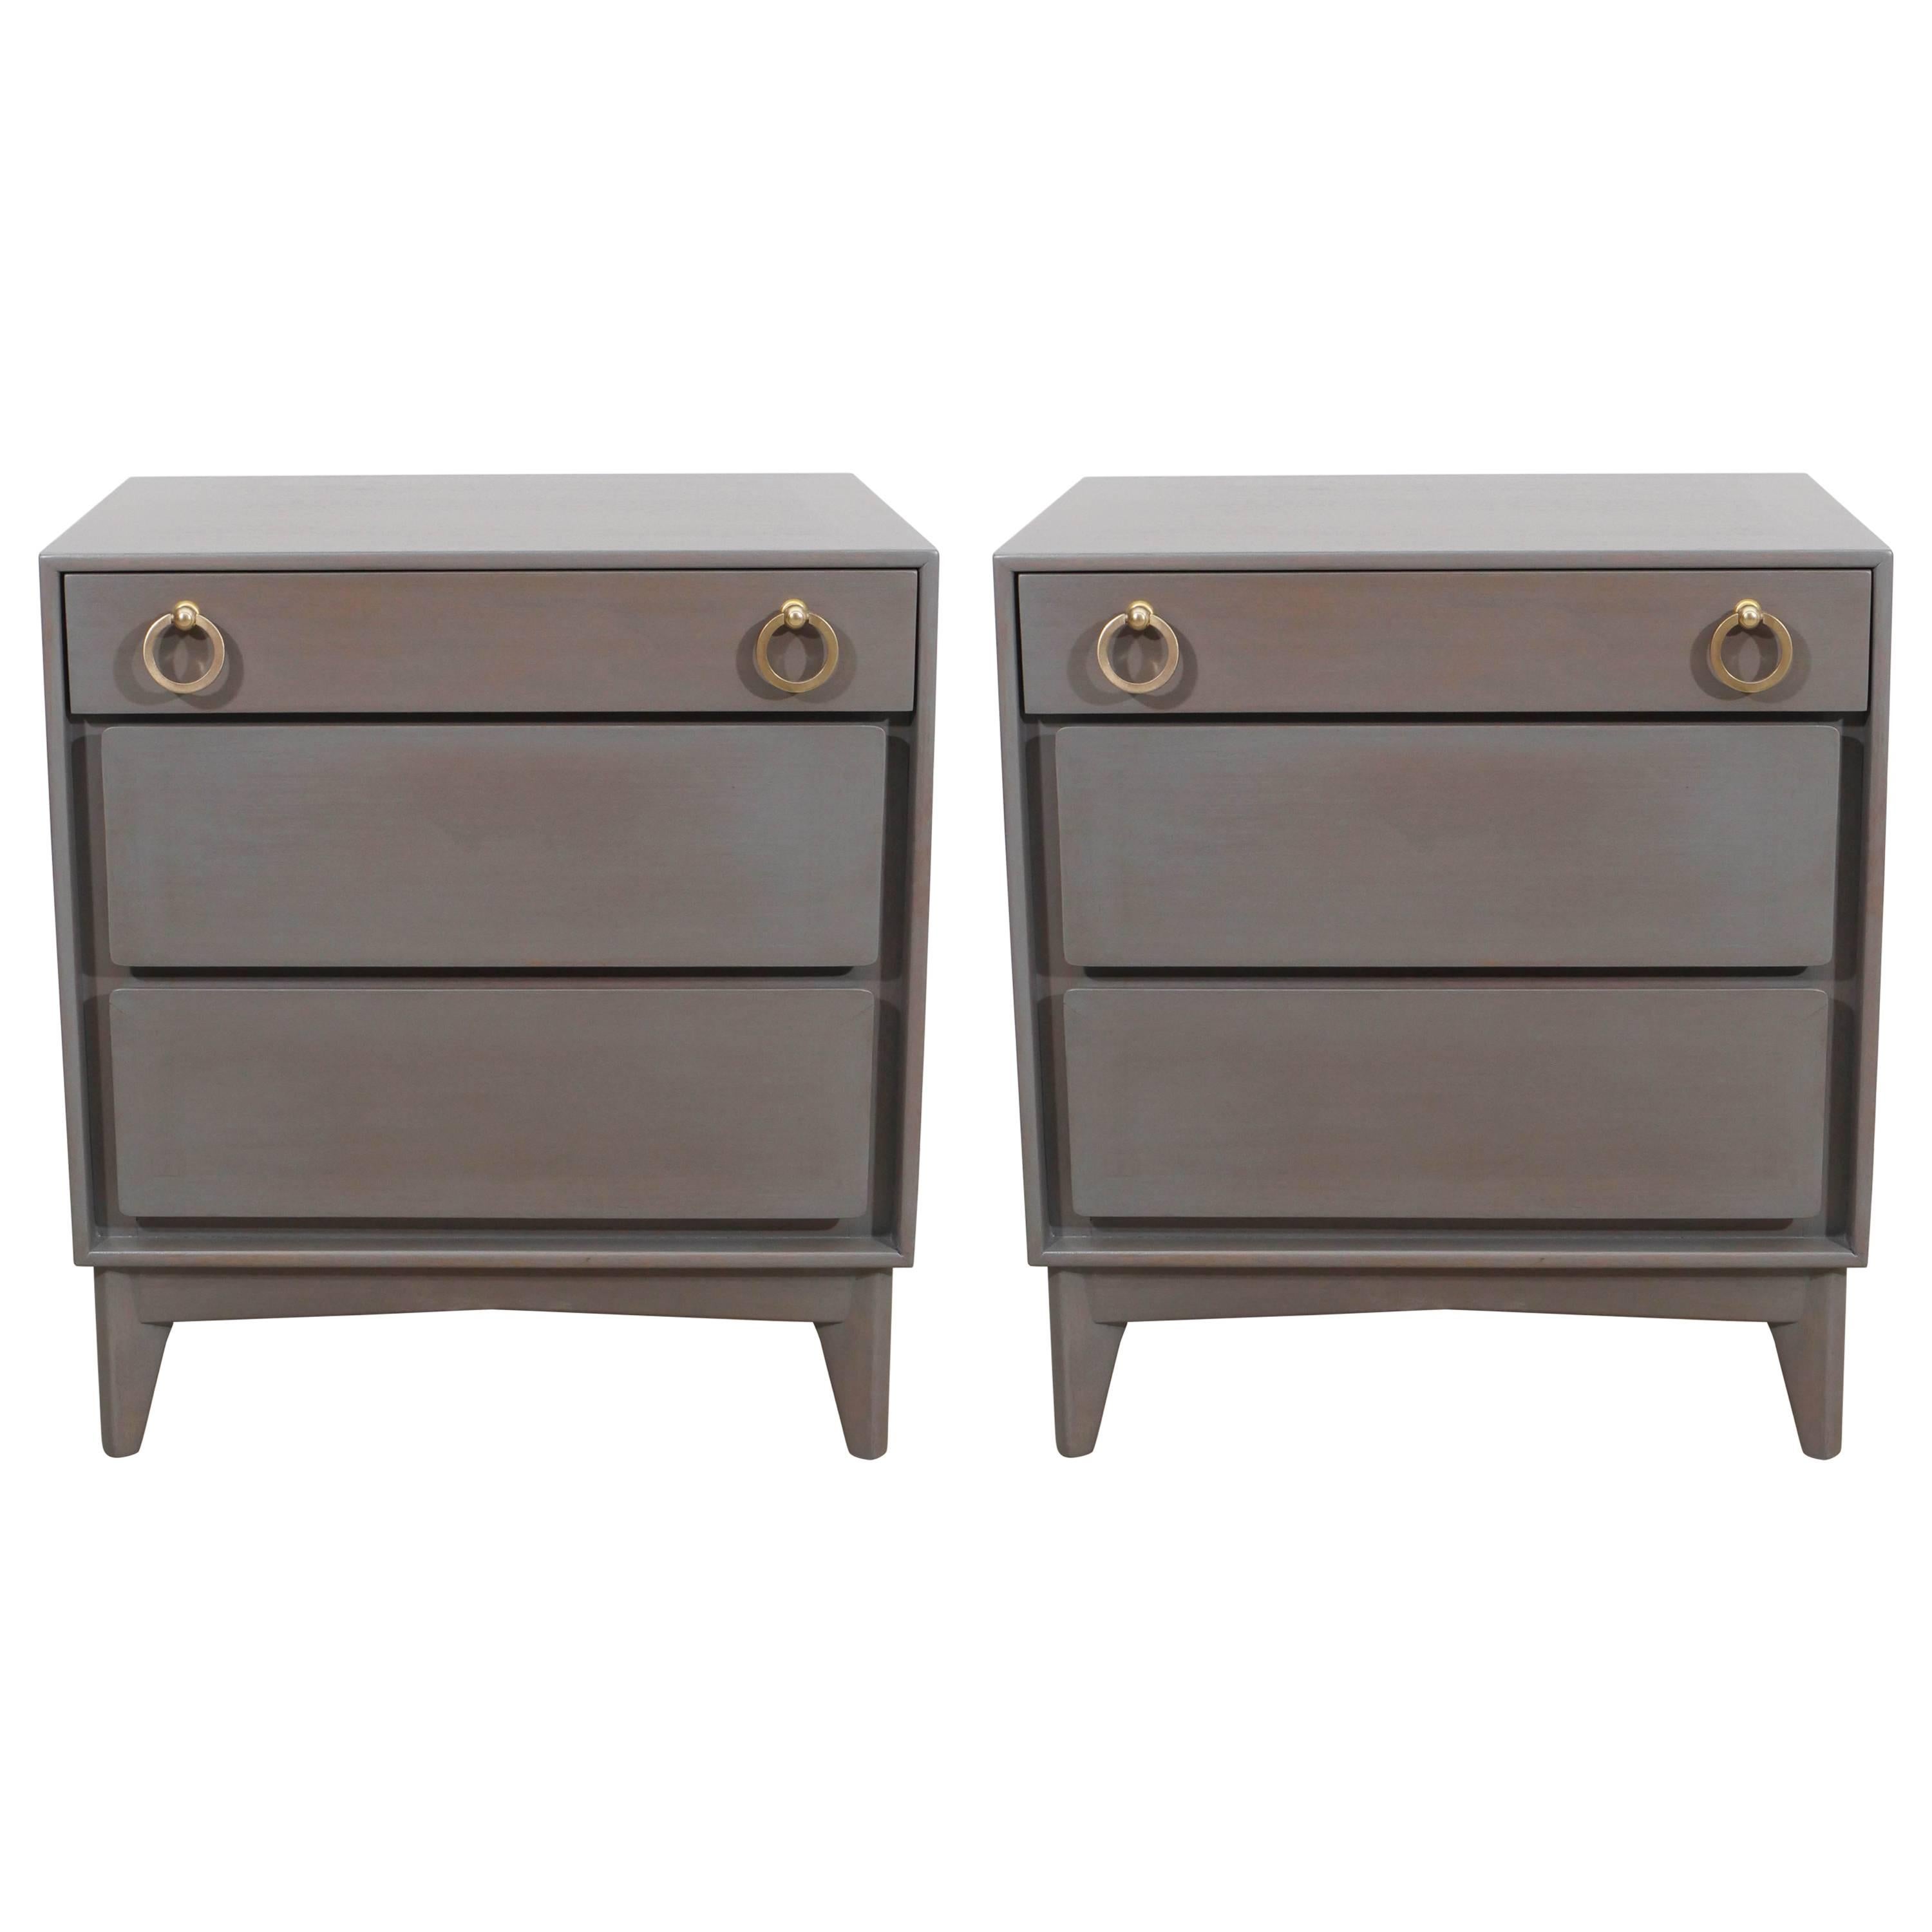 Pair of Midcentury Driftwood Grey Night Stands